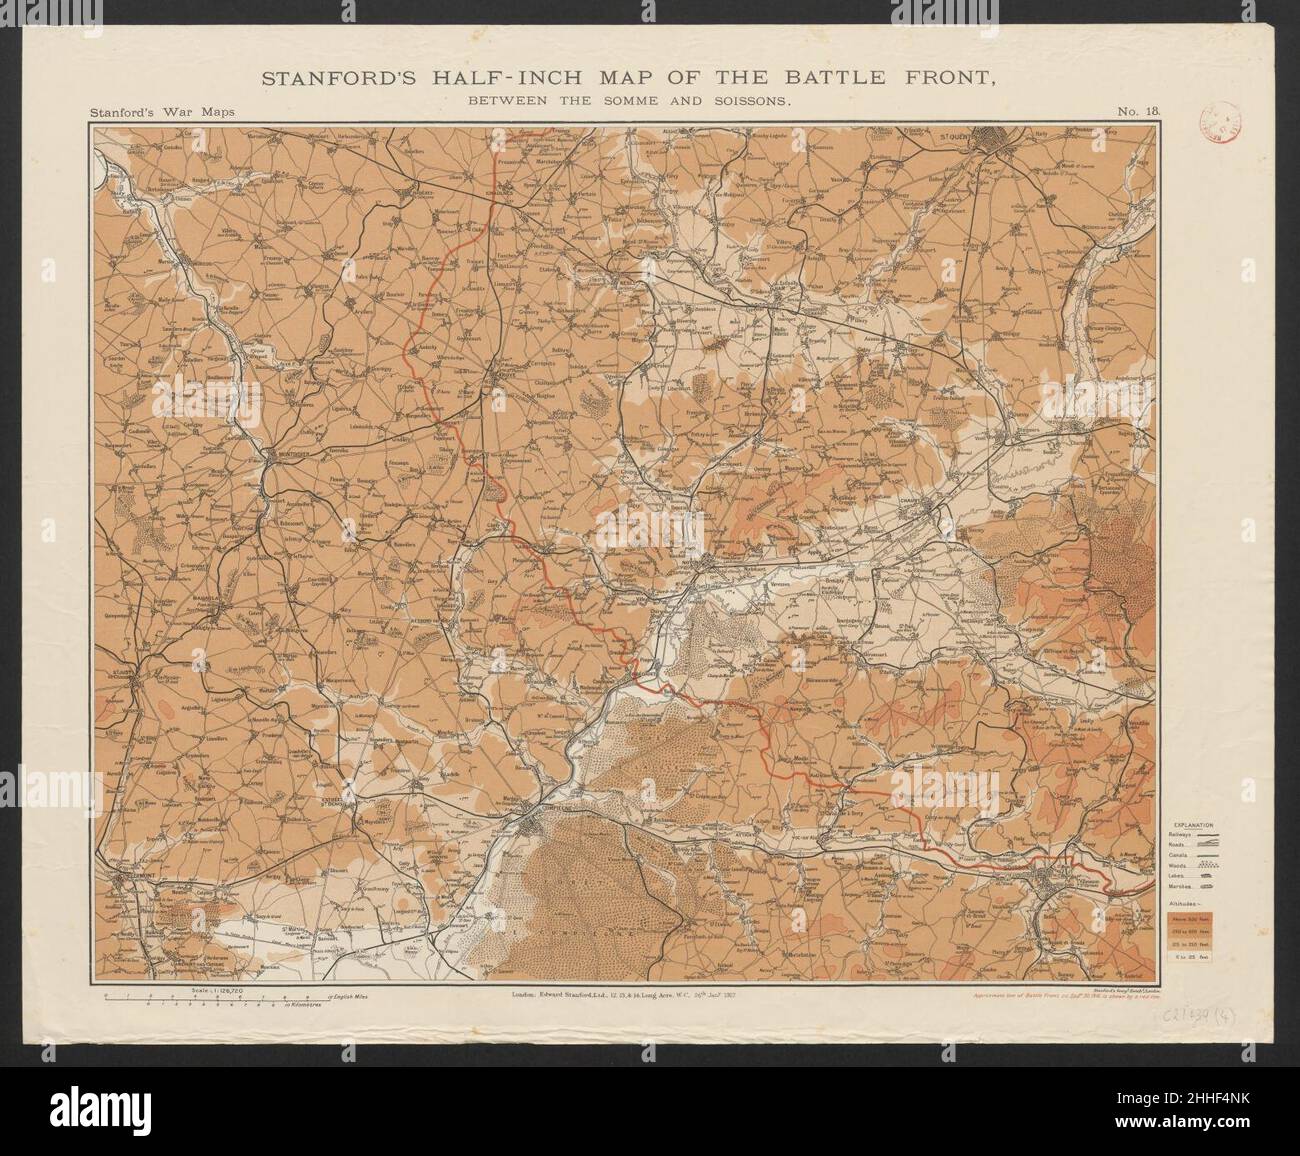 Stanford's half-inch map of the battle front between the Somme and Soissons (5003806). Stock Photo